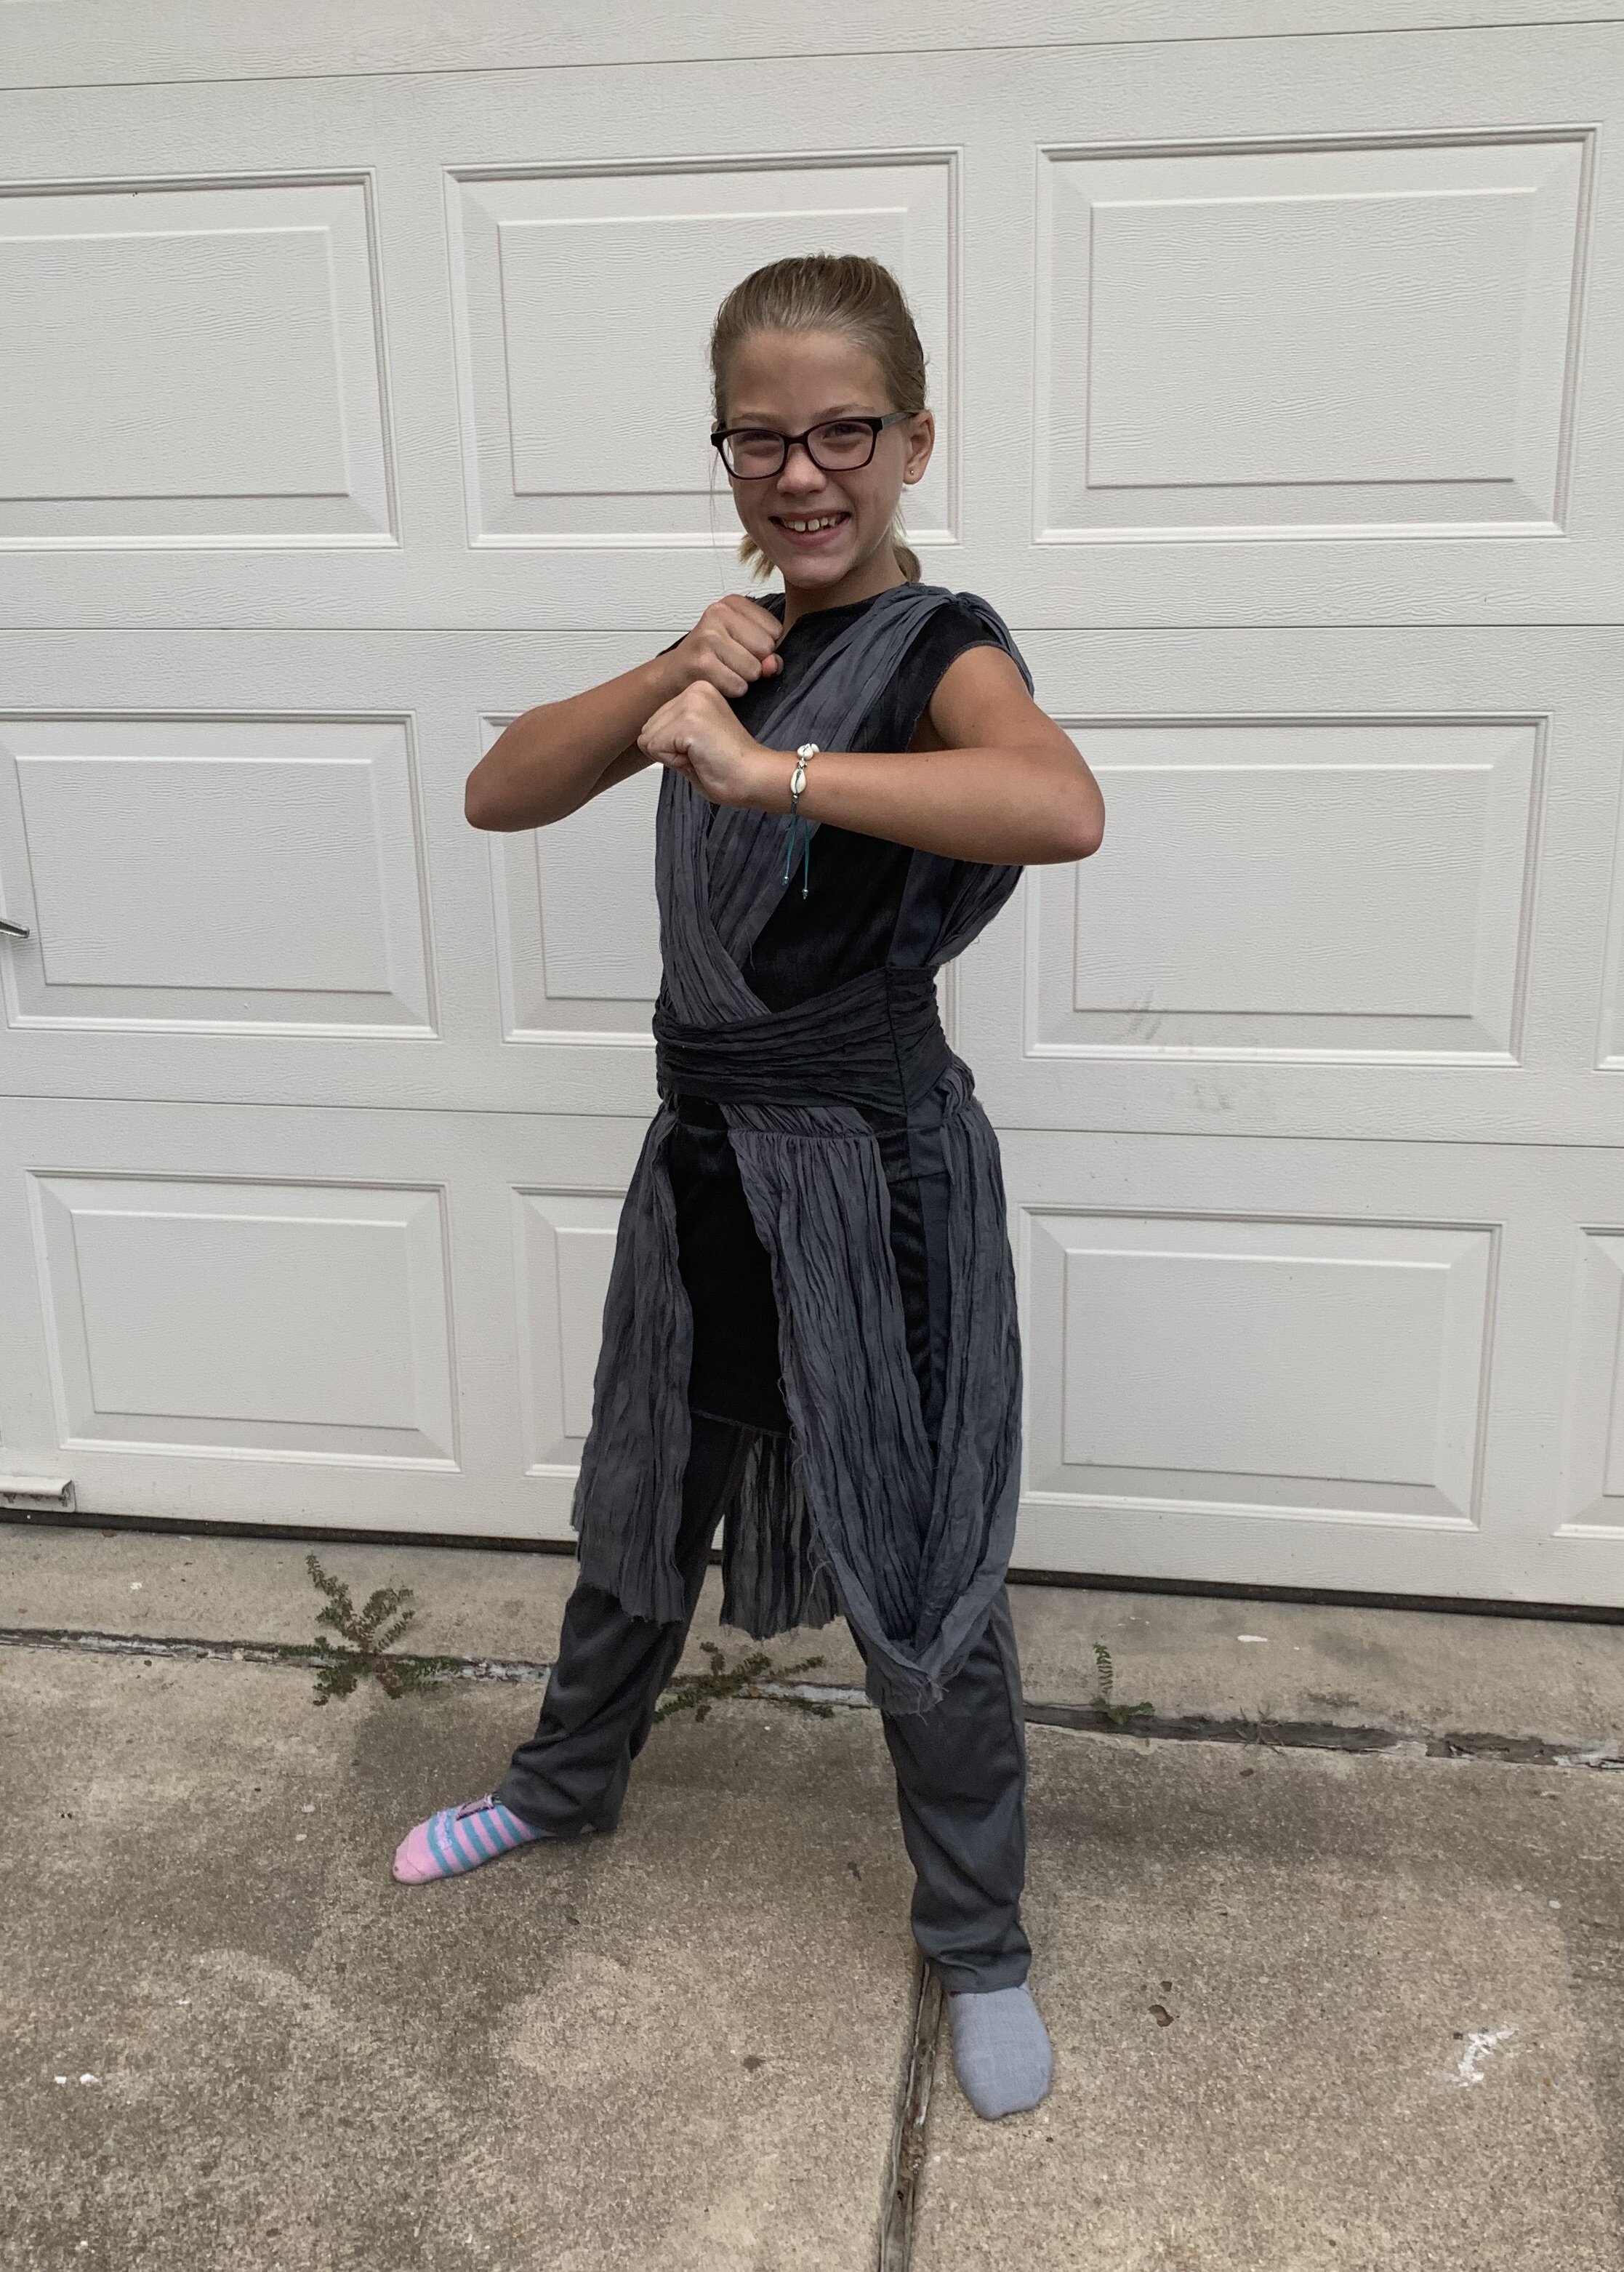 Another Costume - Raegan was super excited to dress up as Ray from Star Wars!